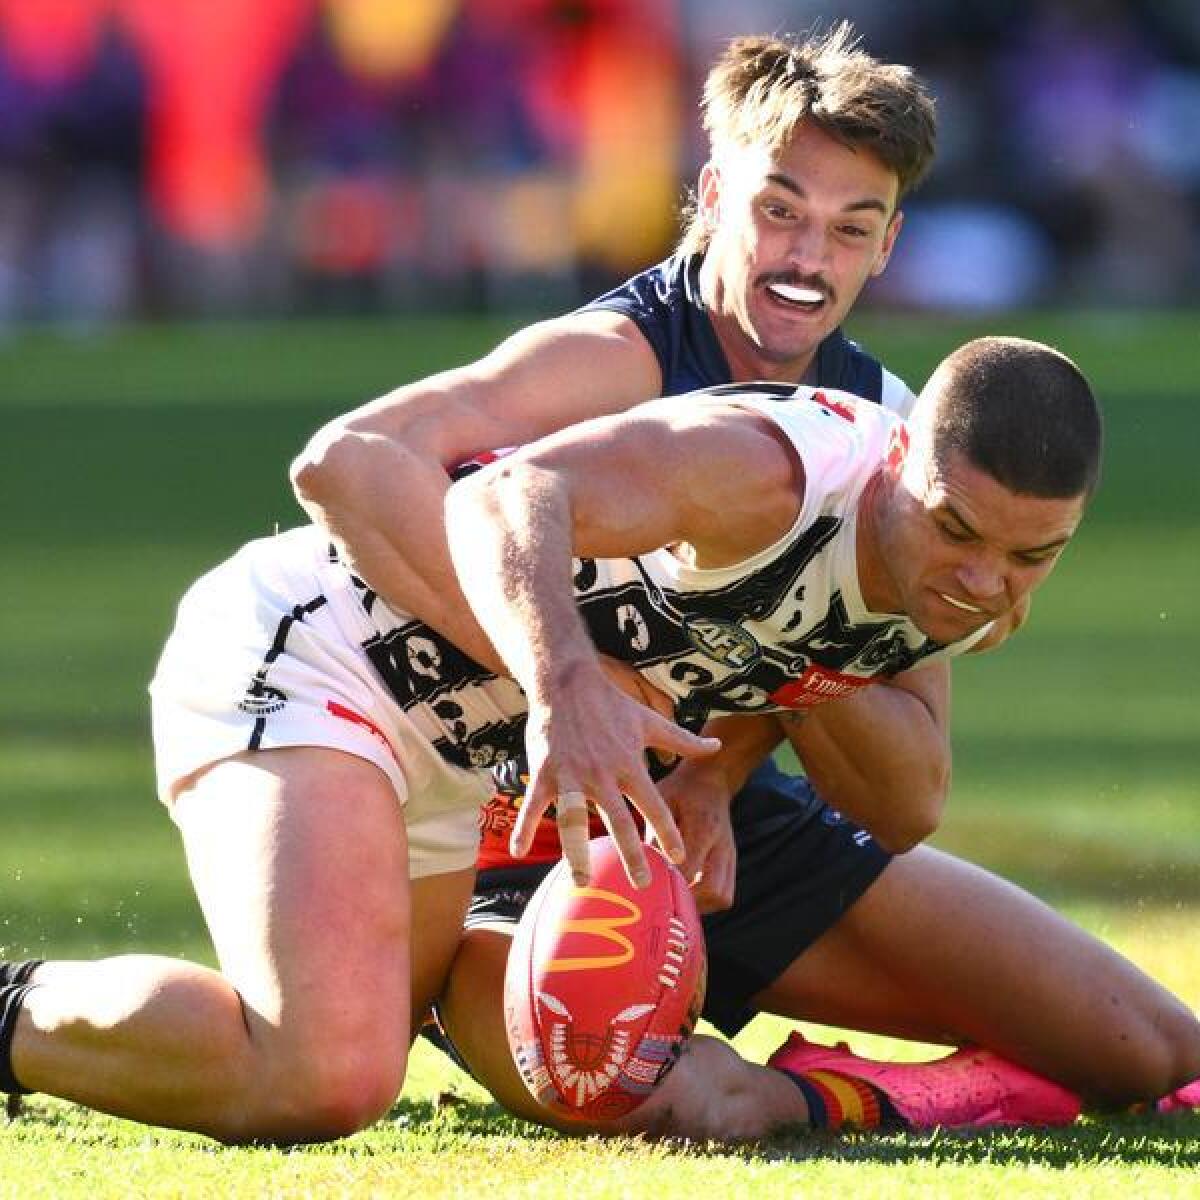 Luke Nankervis of the Crows tackles Lachie Sullivan of Collingwood.